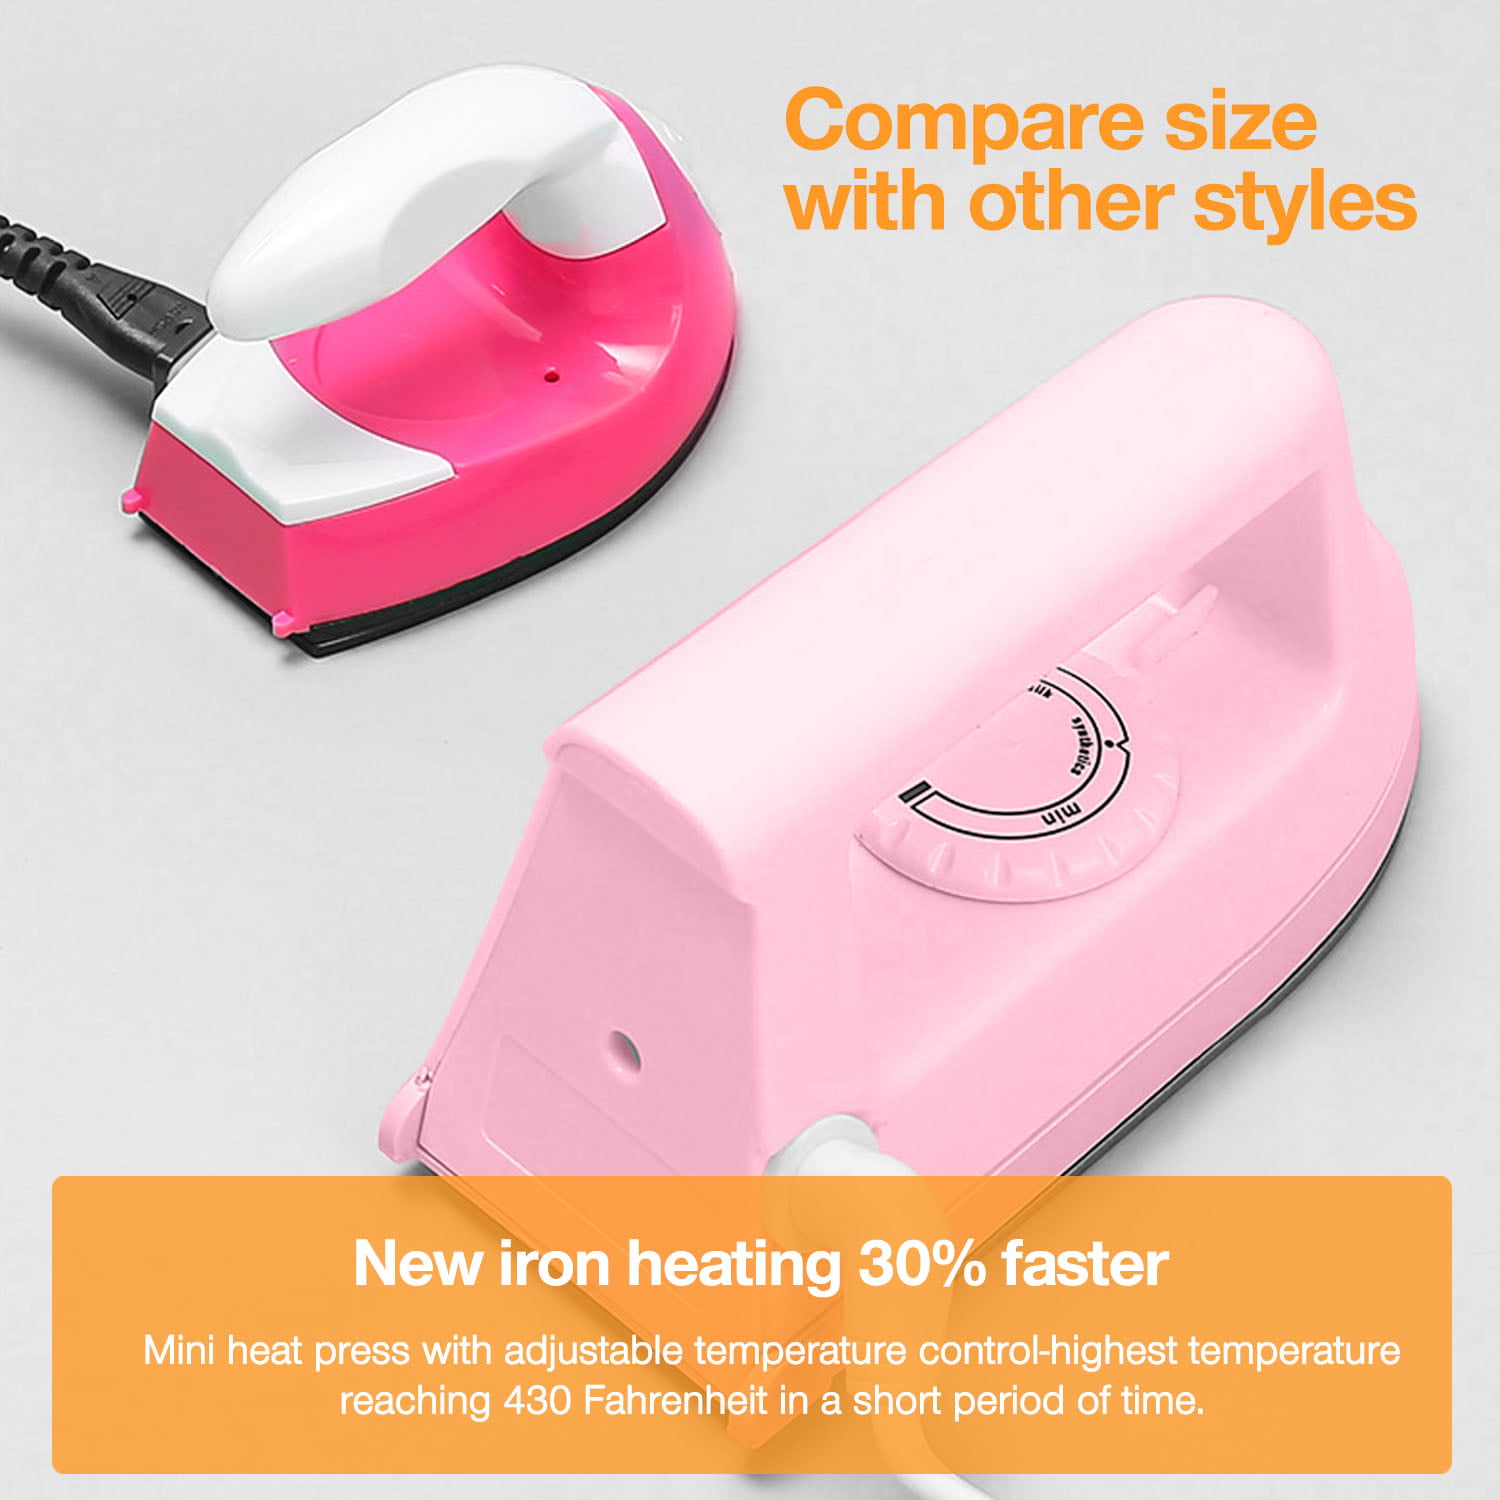 Mini Iron Multipurpose Heat Transfer Handy Small Fitments Stable Electric  Iron for Home Clothes Vinyl Projects Shoes EU Plug